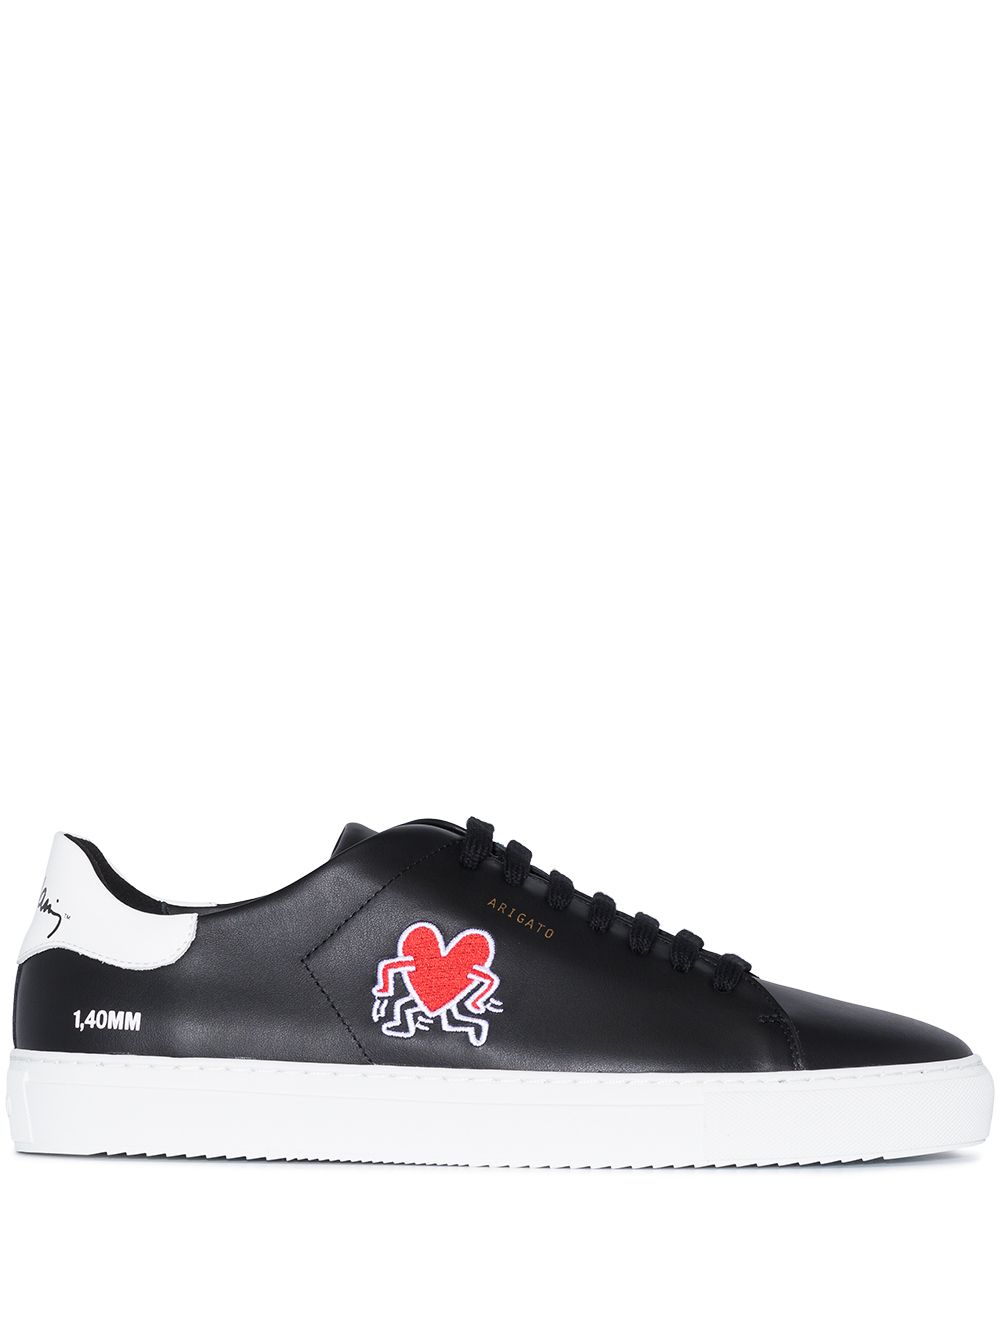 Axel Arigato x Keith Haring Clean 90 Sneakers - Farfetch